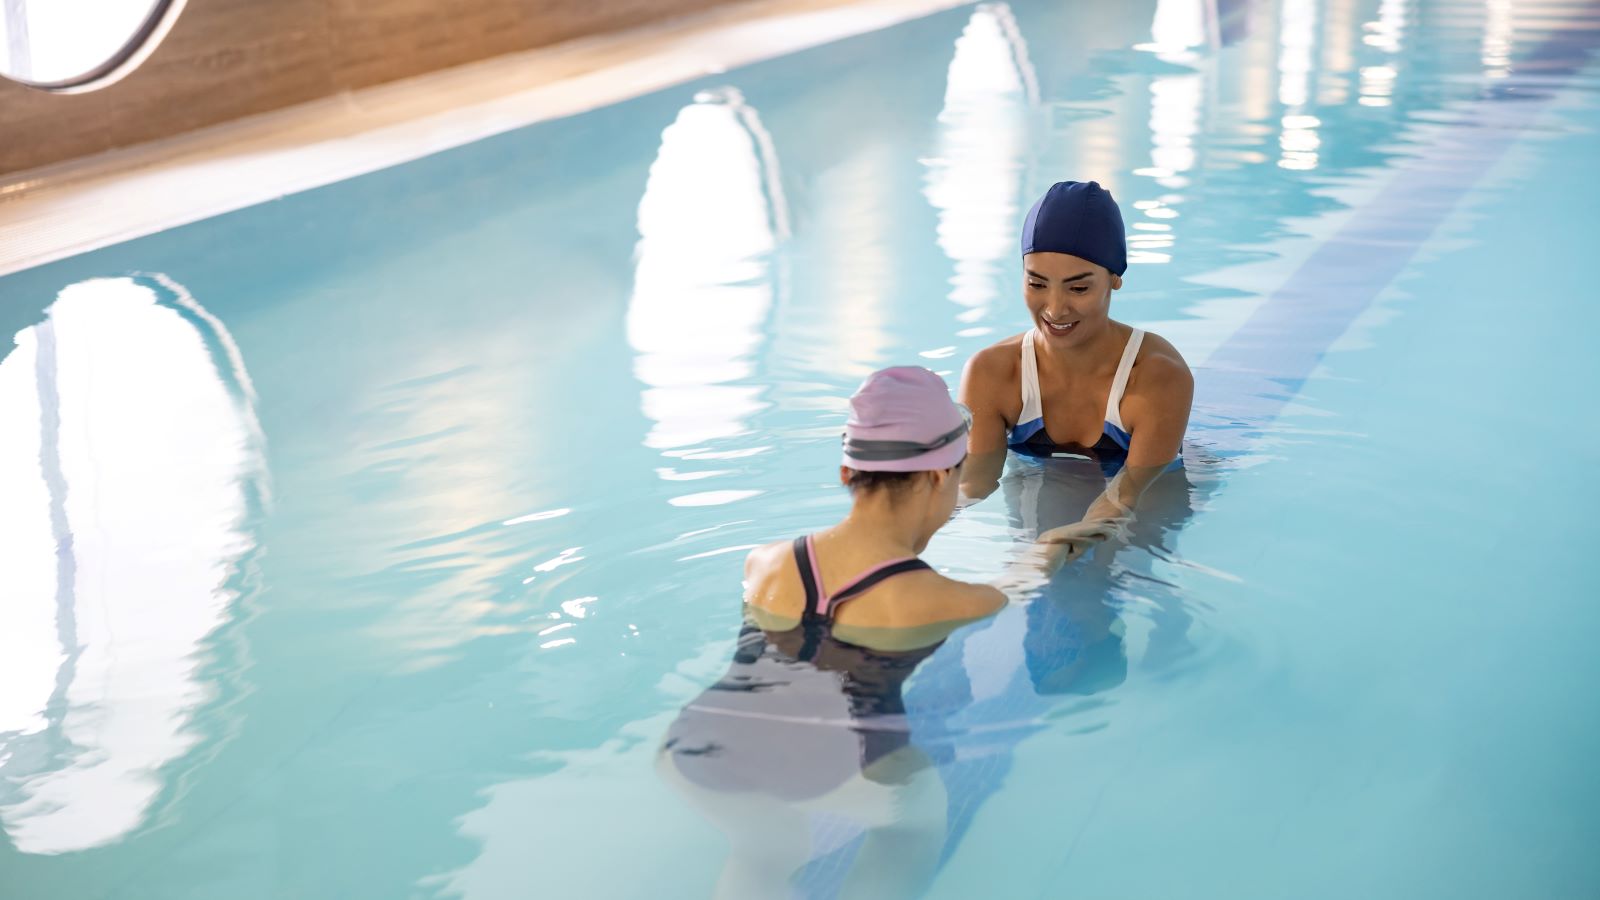 A far cry from the childhood swim lessons of your past, aquatic therapy offers a way for patients to decrease pain and increase mobility.